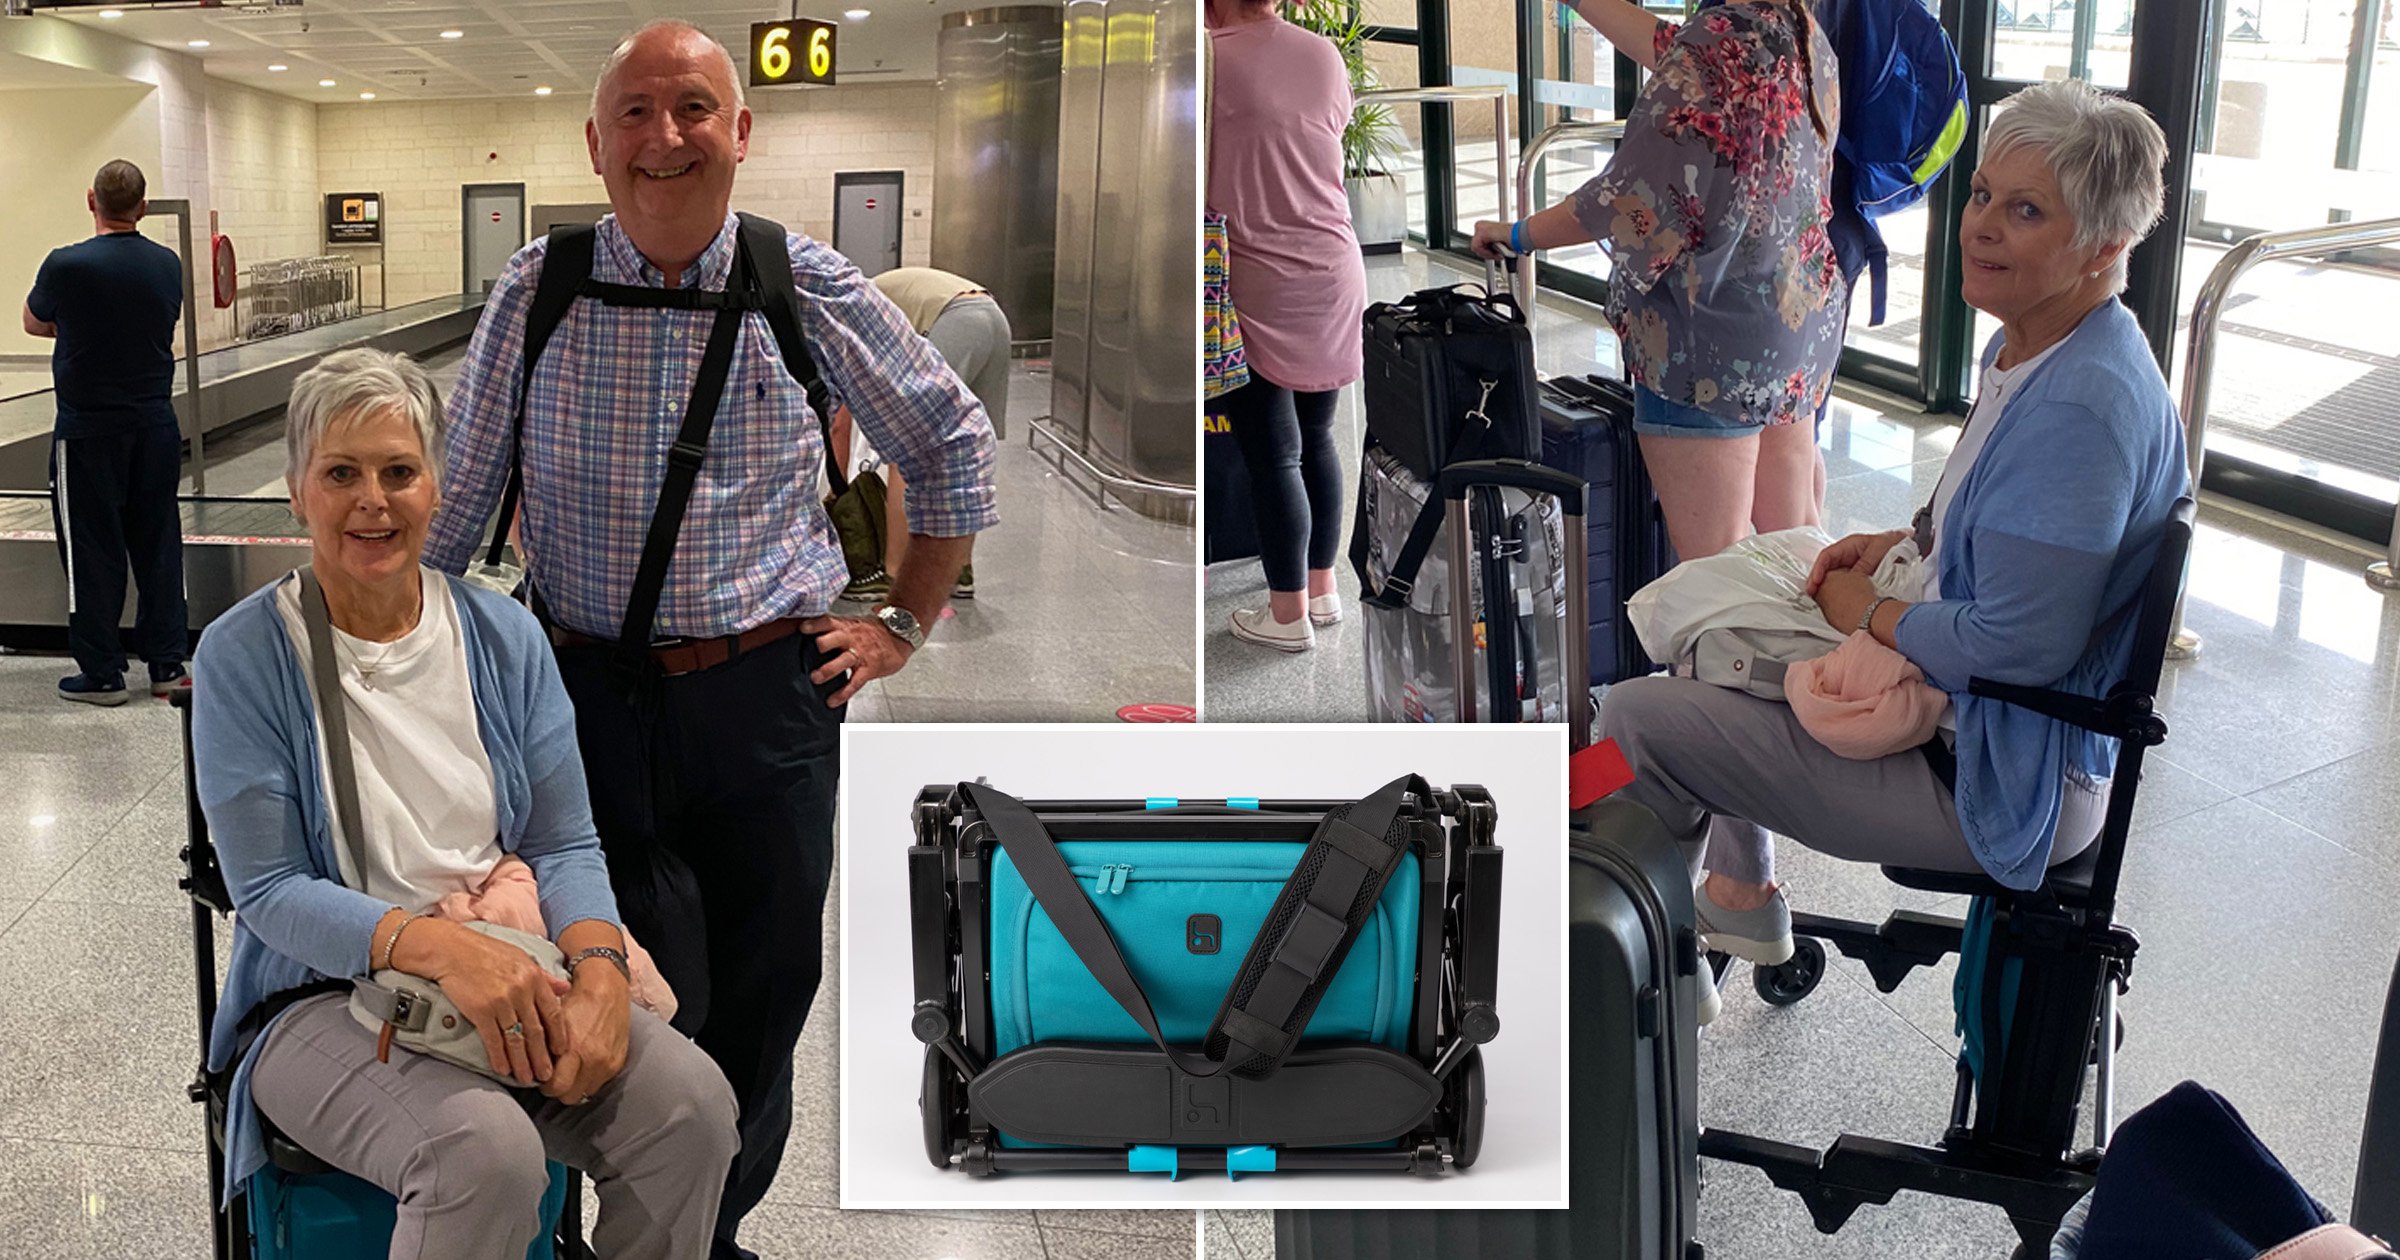 Grandad sick of waiting on planes for help creates carry-on wheelchair for disabled wife